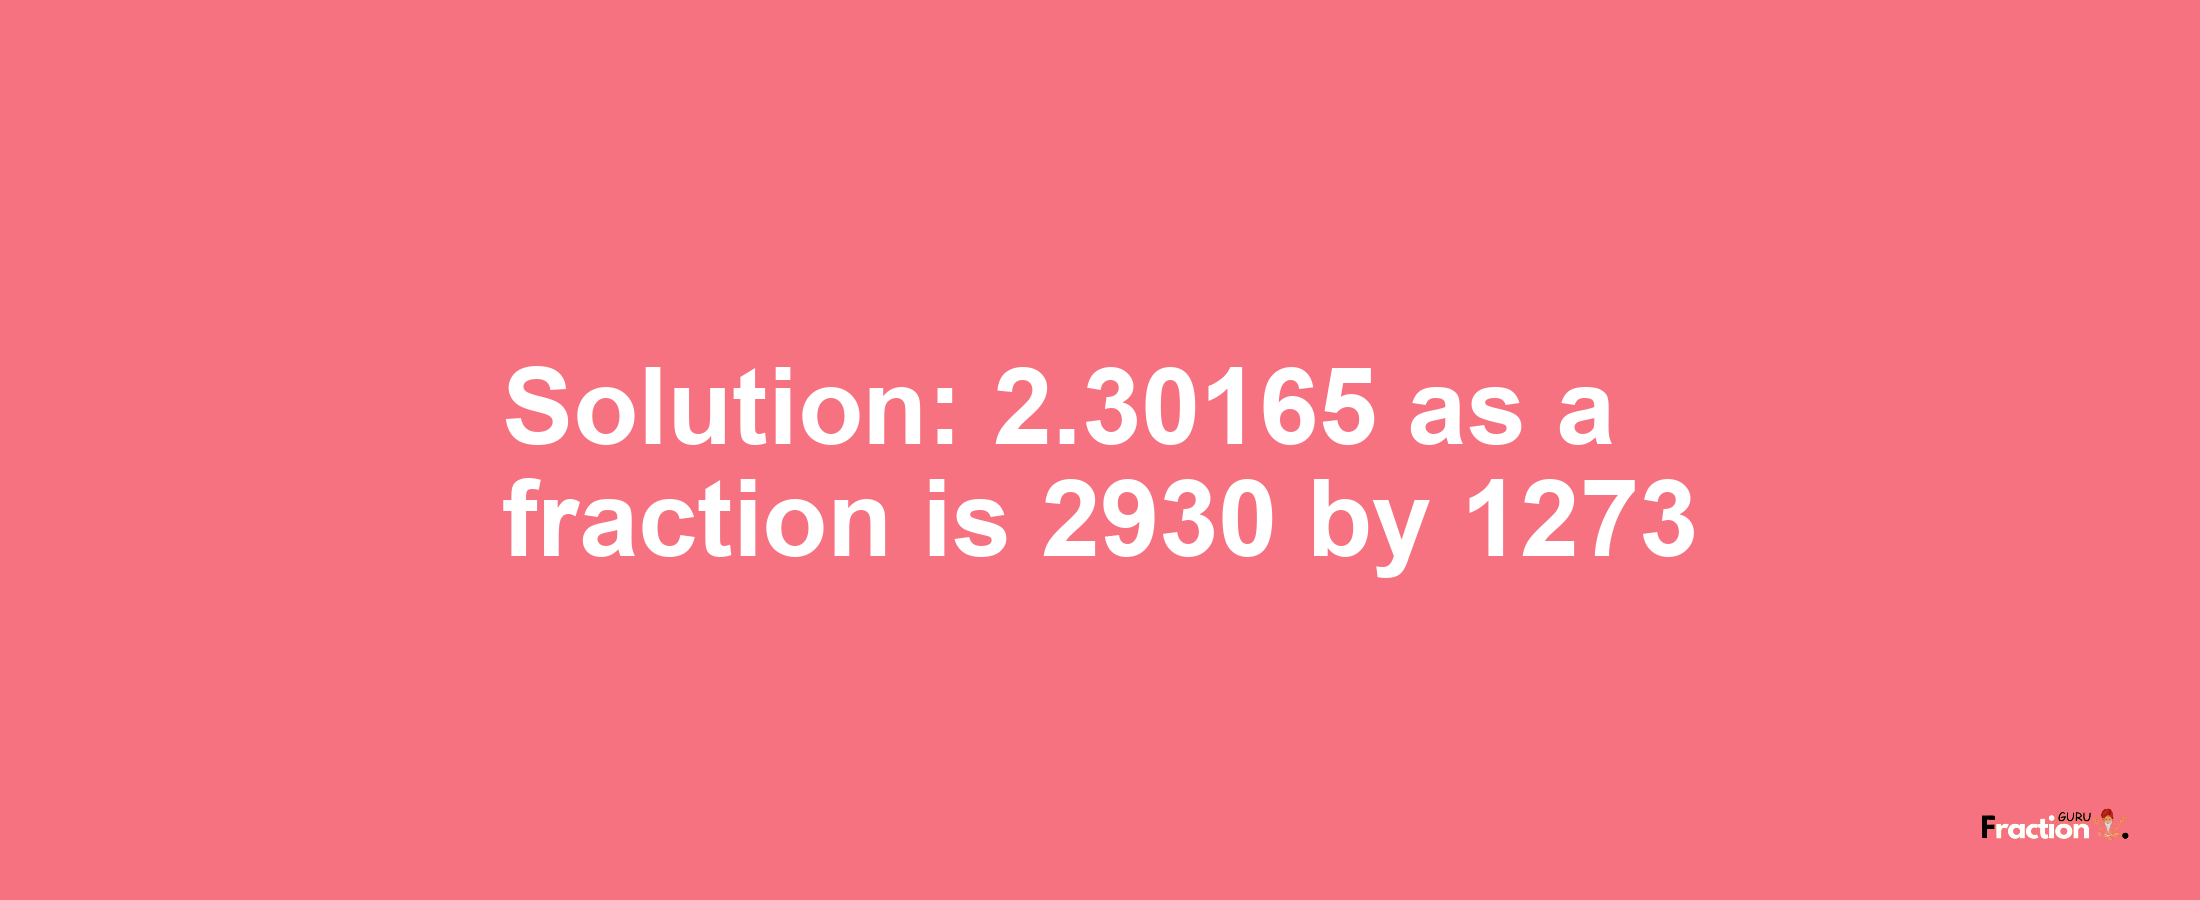 Solution:2.30165 as a fraction is 2930/1273